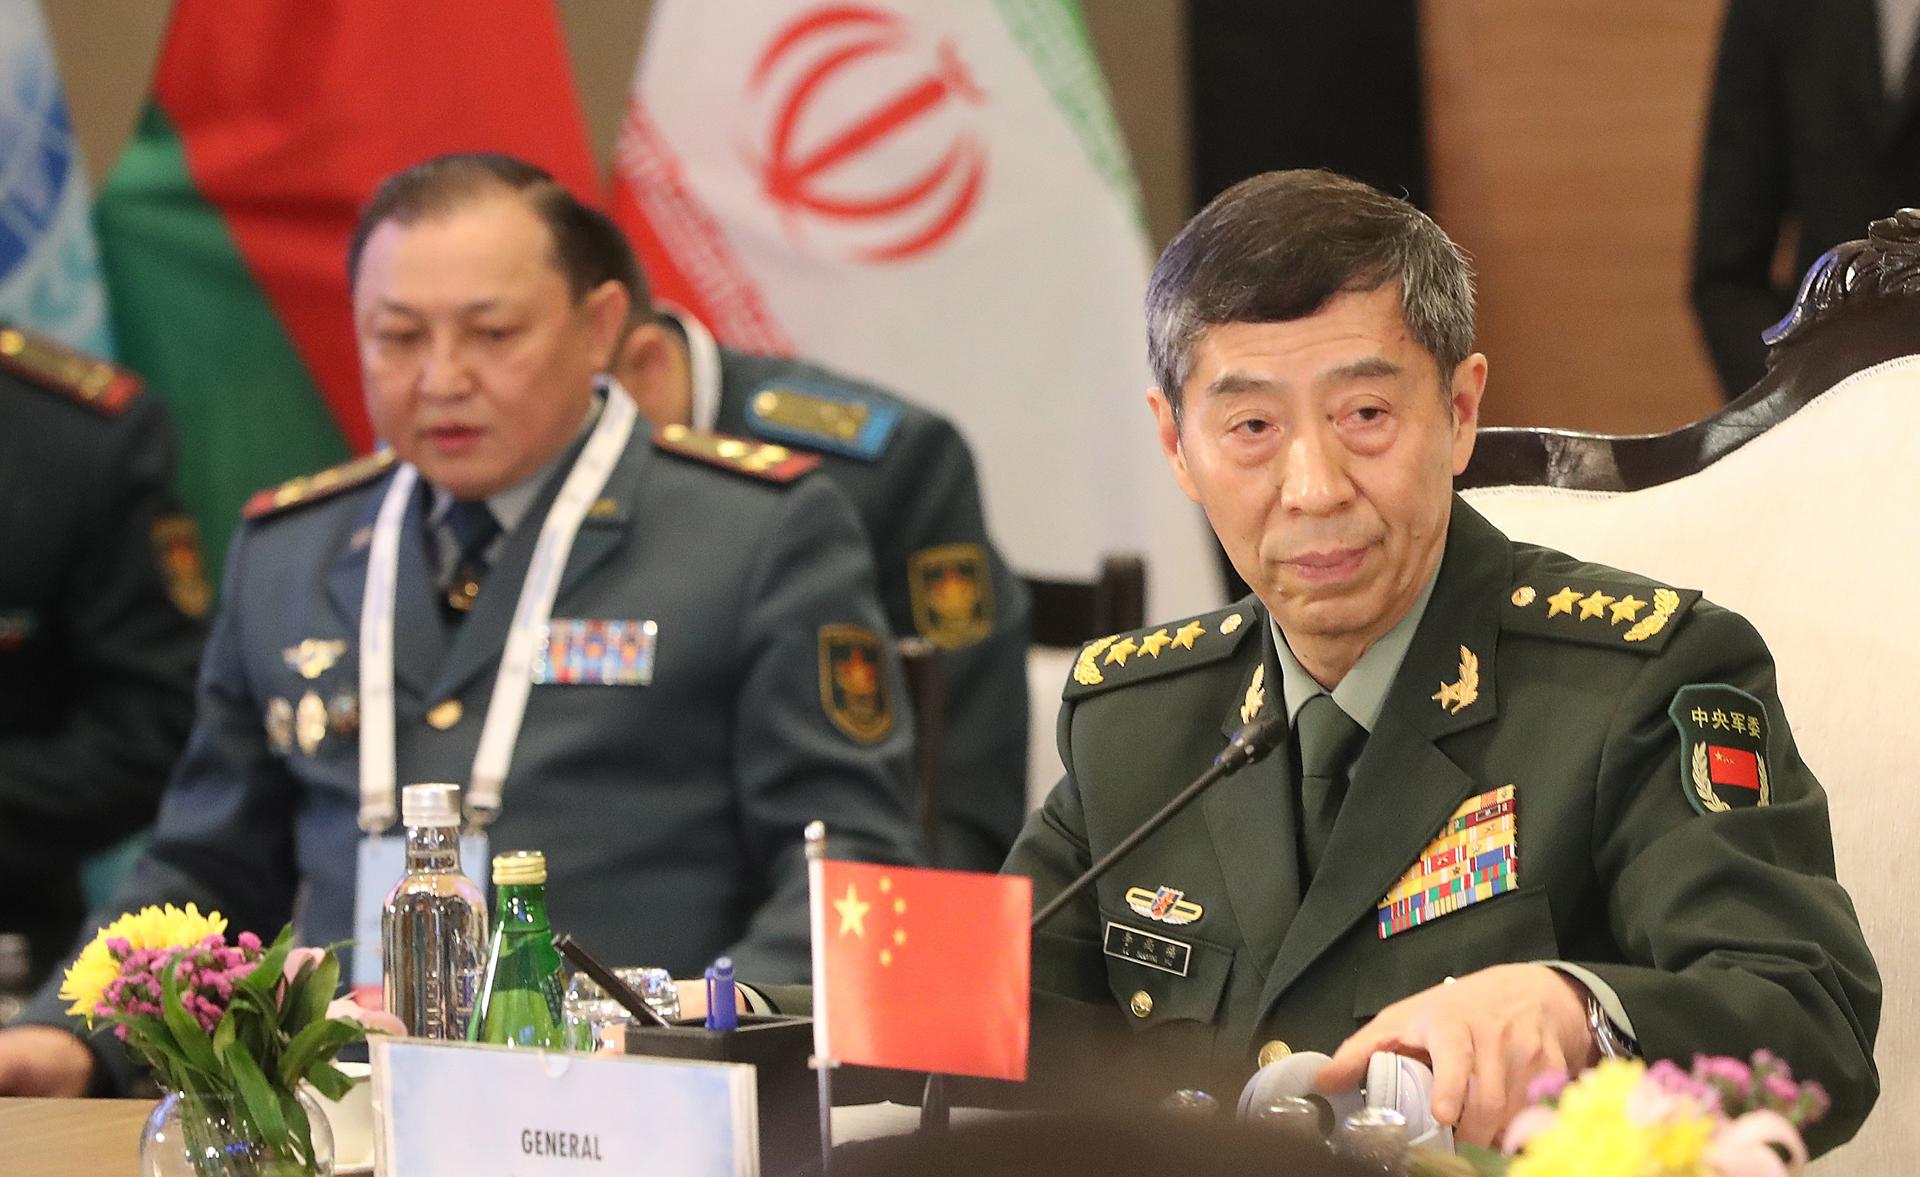 Chinese Defence Minister Li Shangfu participates in the Shanghai Cooperation Organization (SCO) defence ministers meeting in New Delhi India, 28 April 2023. EFE/EPA/HARISH TYAGI